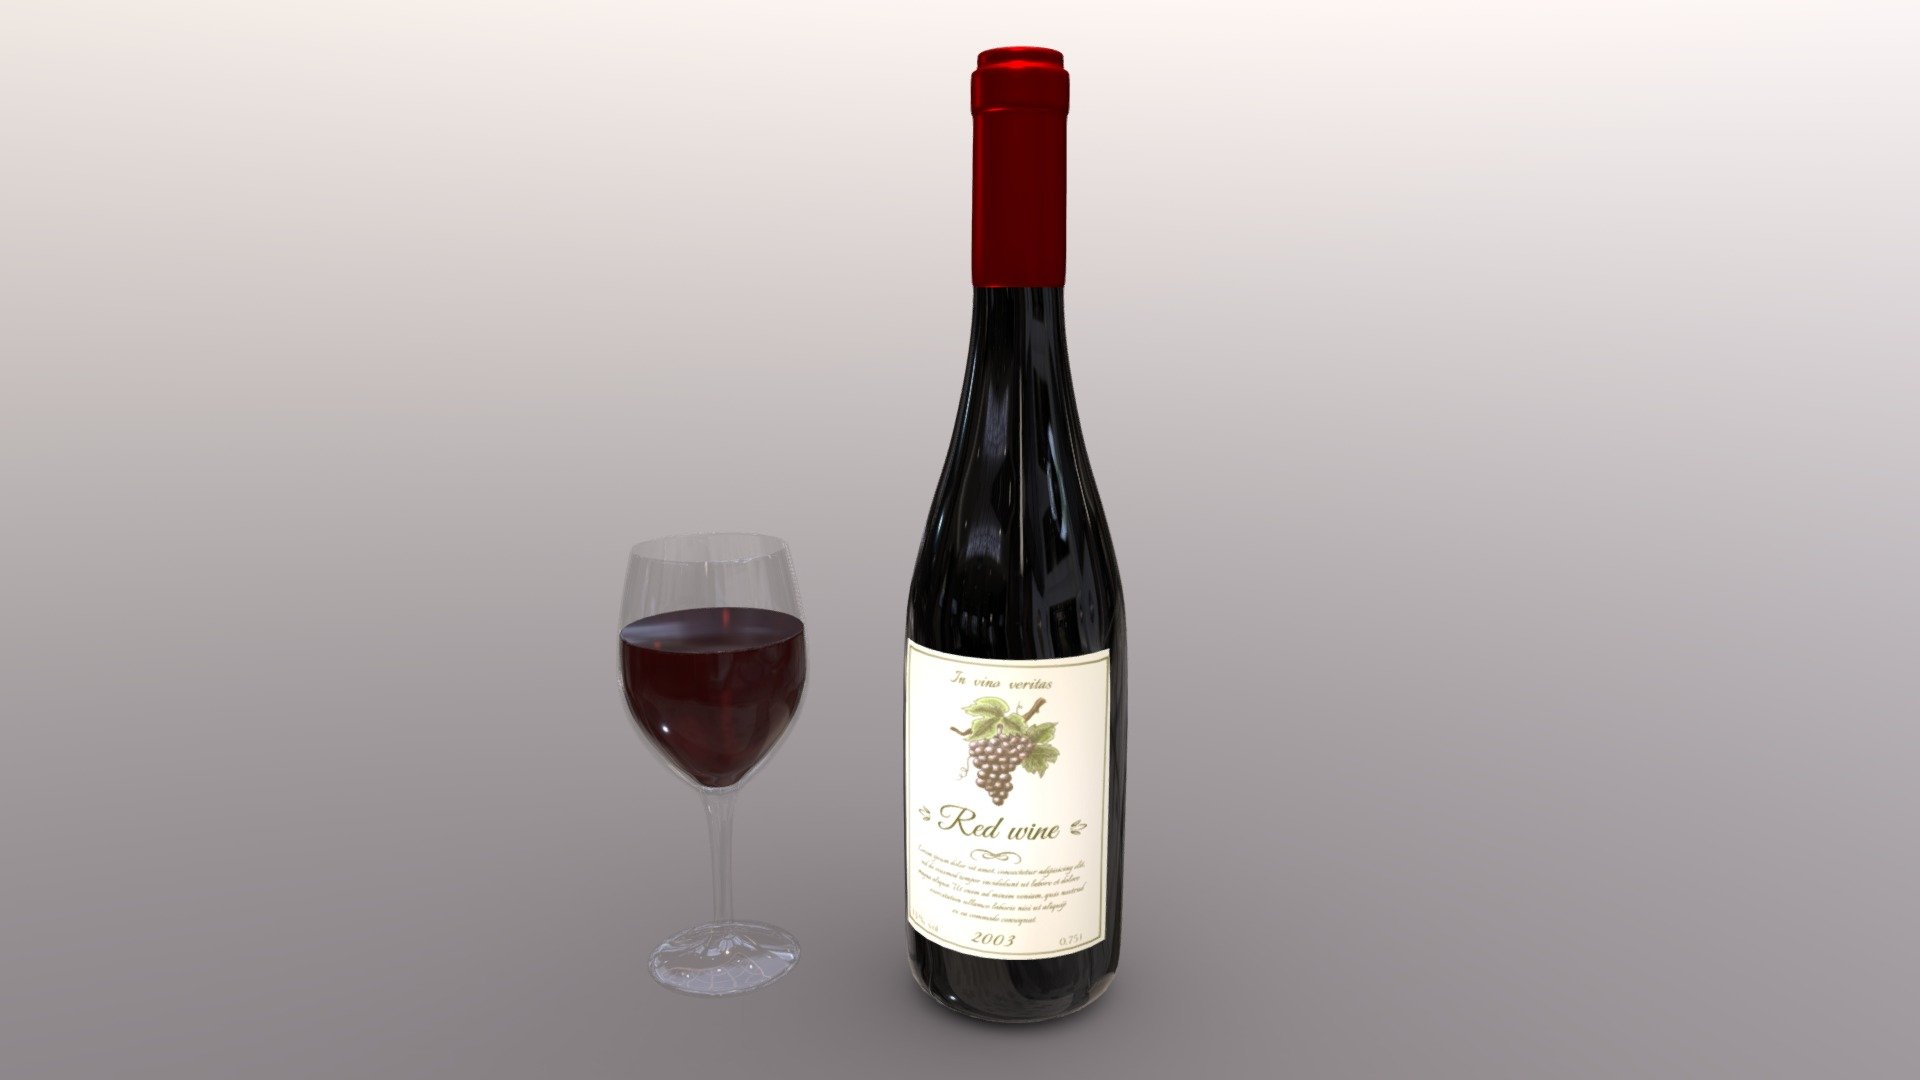 A model of a wine bottle and glass                                                 

Includes a glass of wine                                               

No copyright                                    

Free download                                 

Made in Maya - Wine Bottle and Glass - Download Free 3D model by JoeDev 3d model